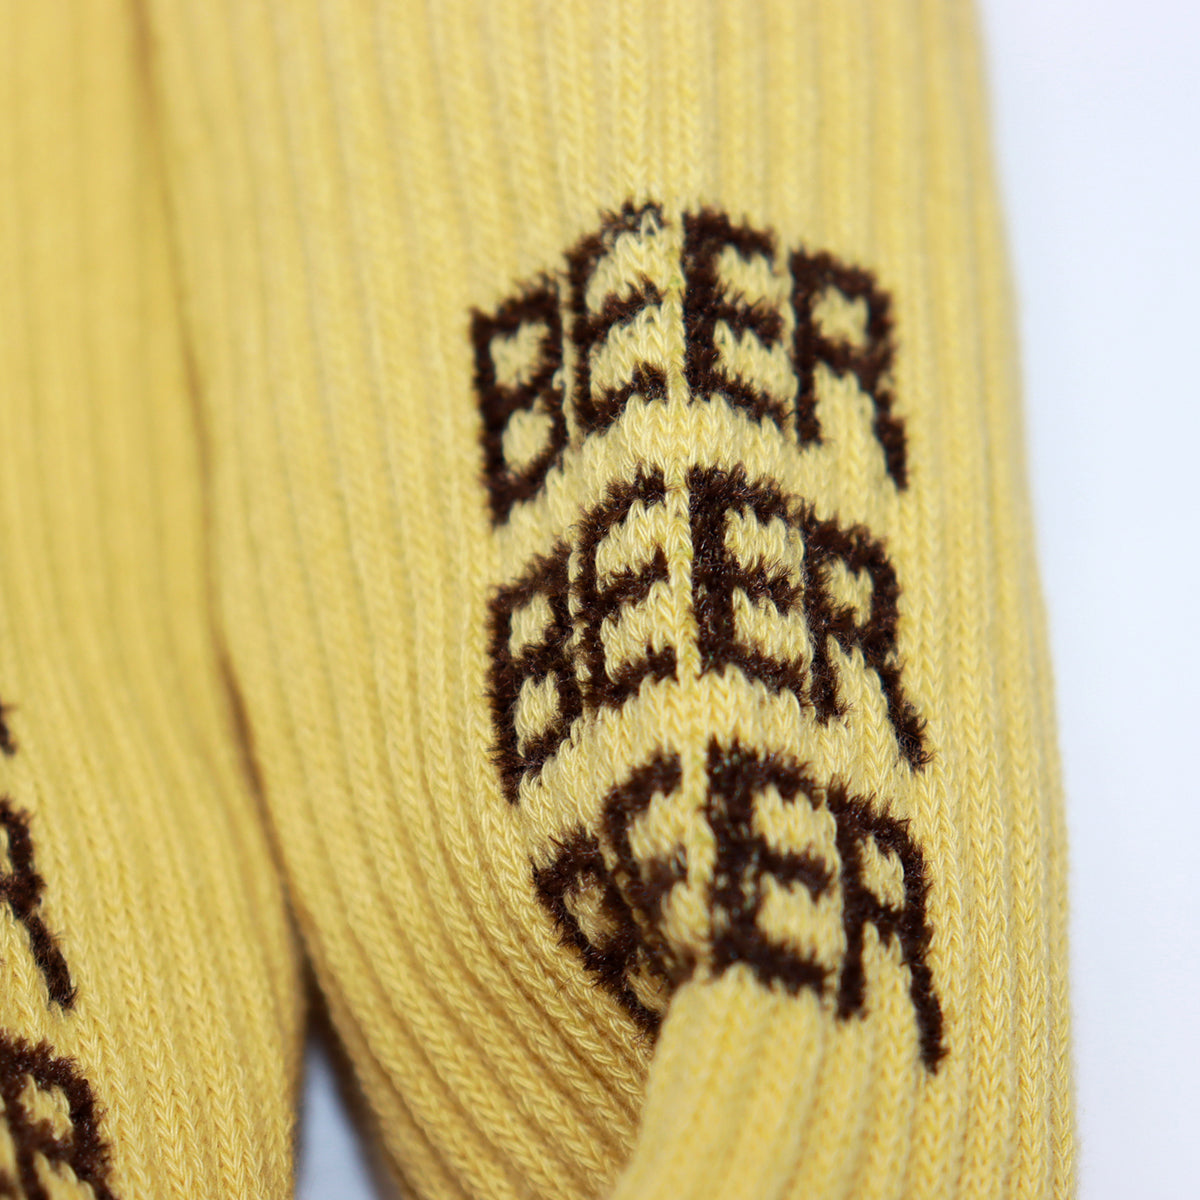 Rostersox Yellow Beer Socks